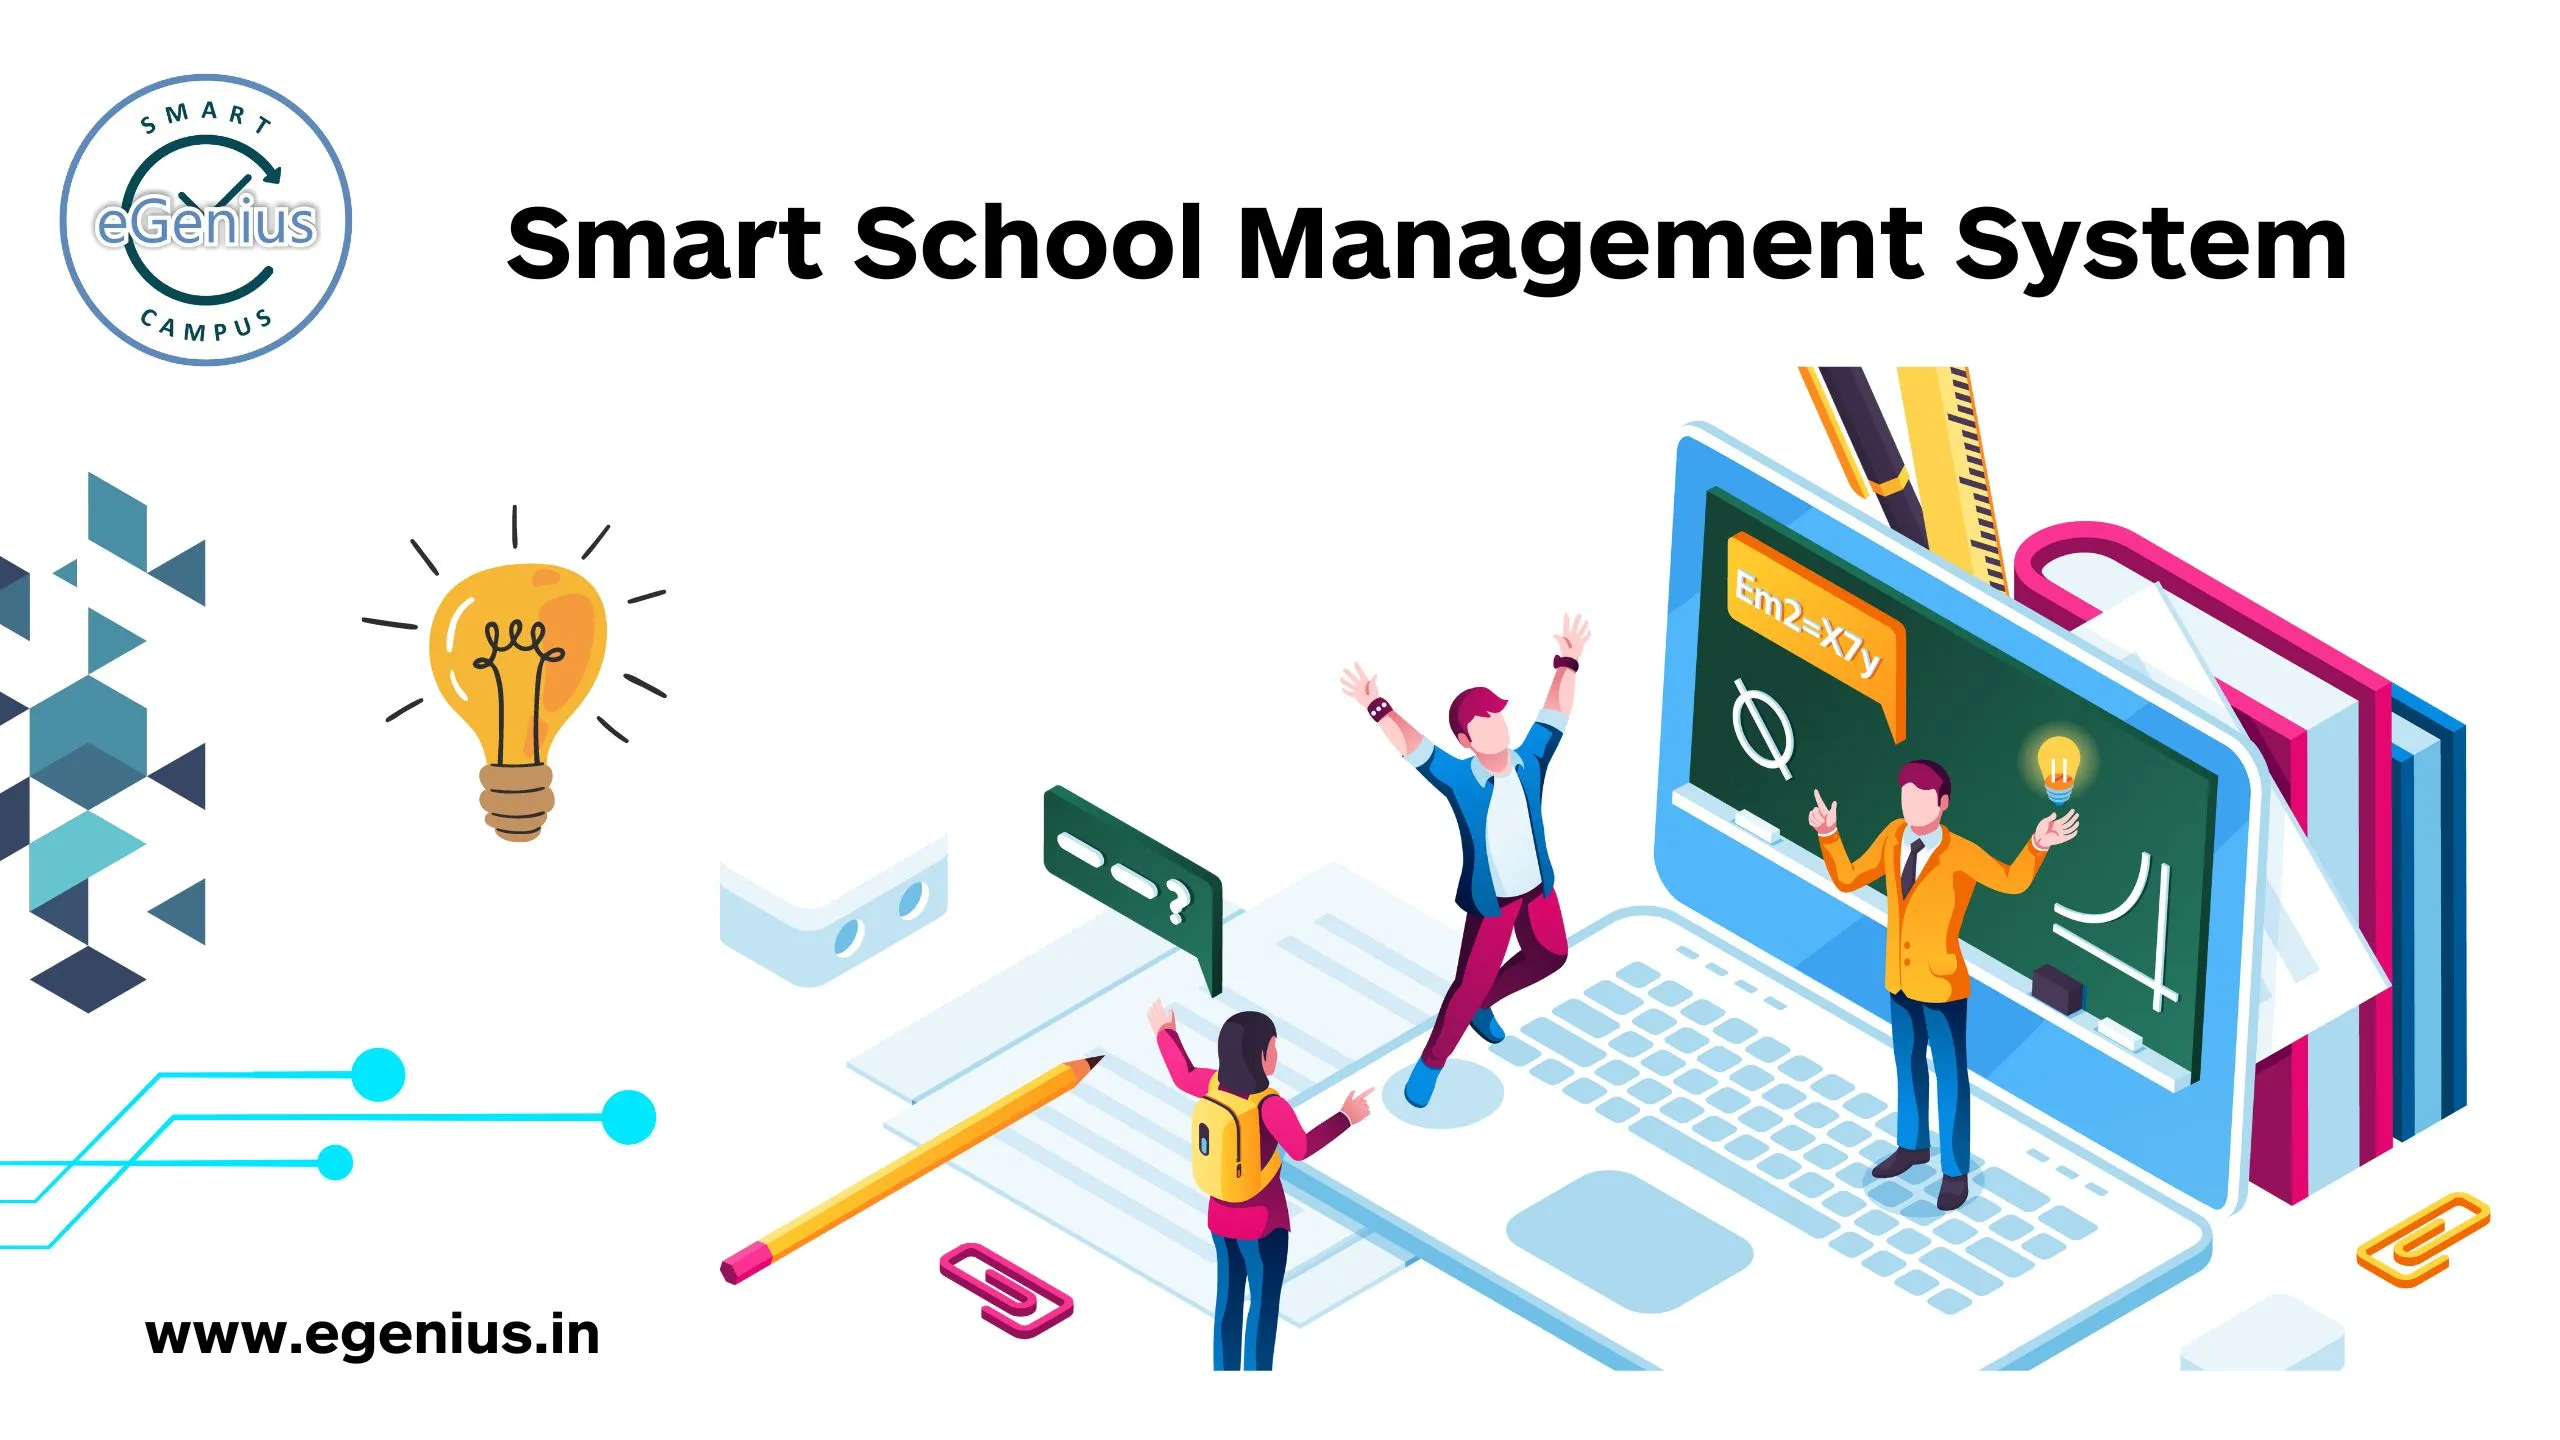 Inspiring Educators: The Role of Technology in Enhancing Teaching through Smart School Management System 